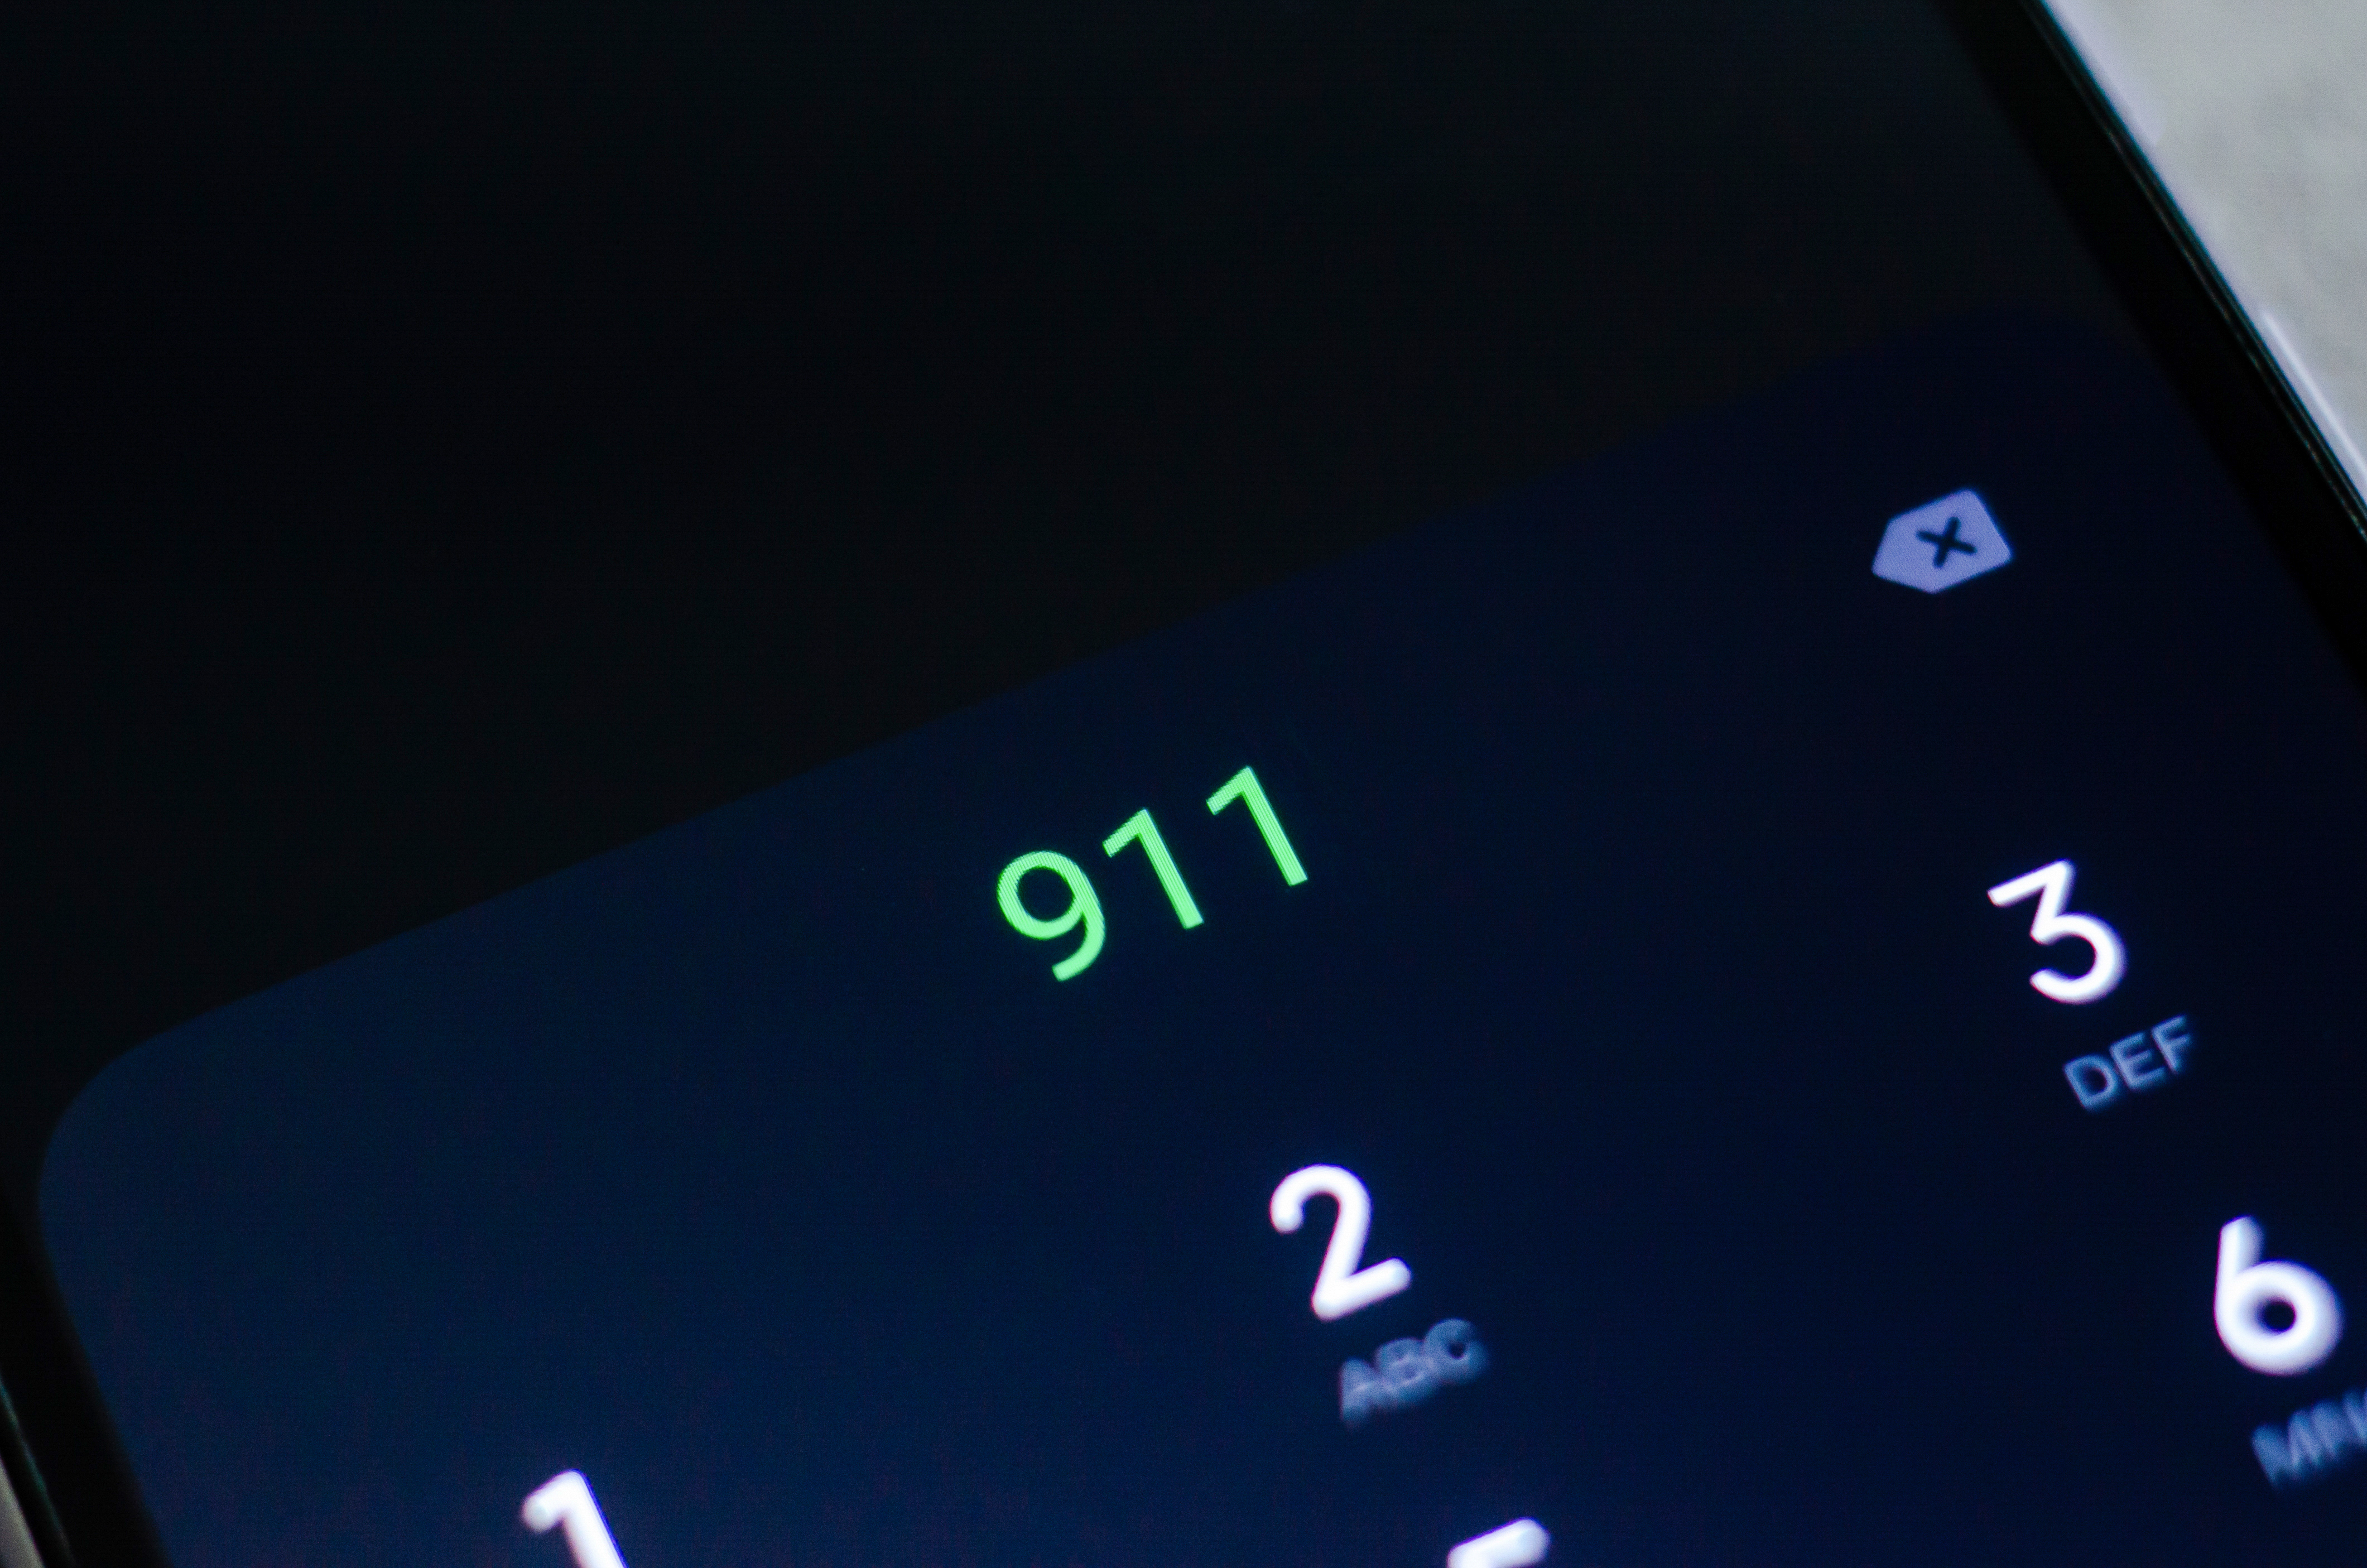 A cell phone showing 911 on its display.